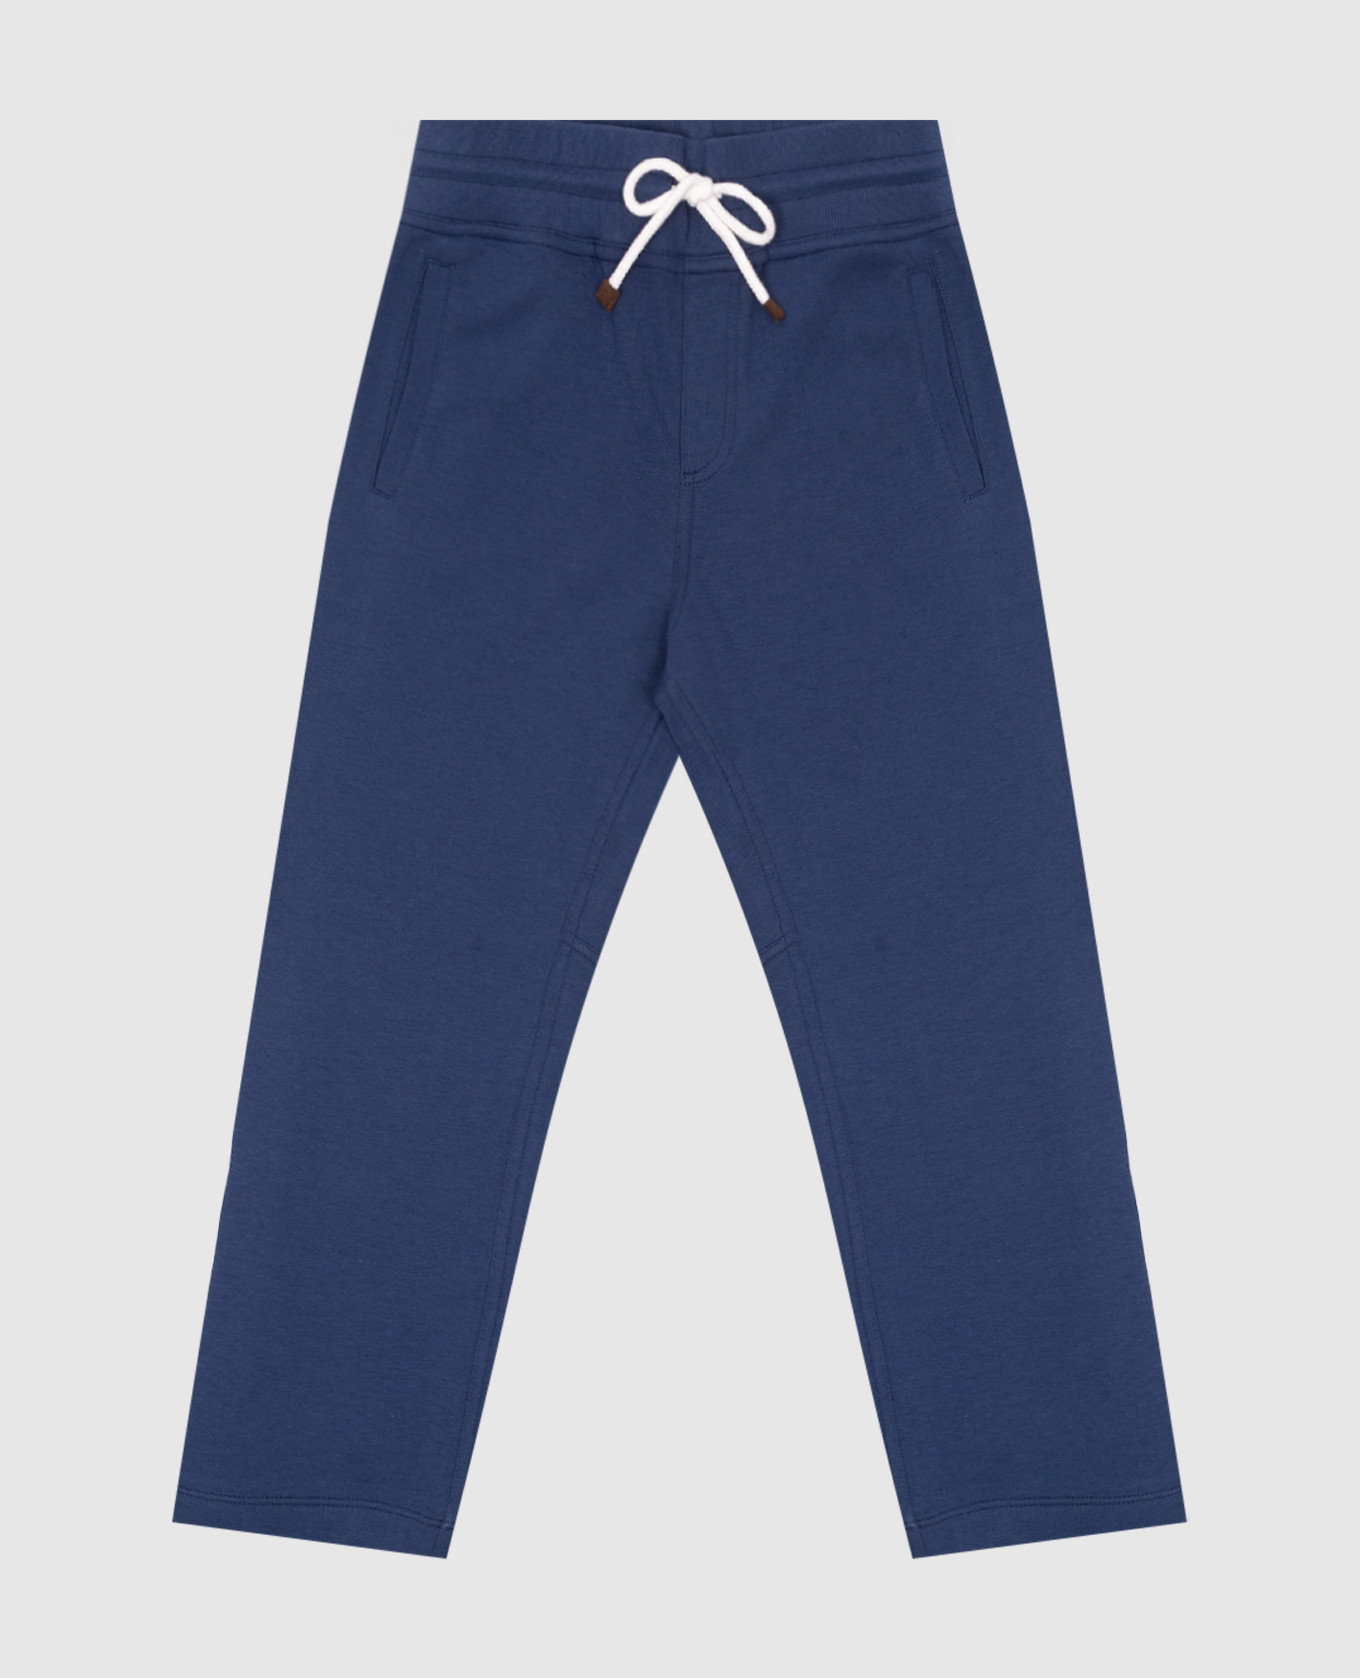 Children's blue sports pants with stripes